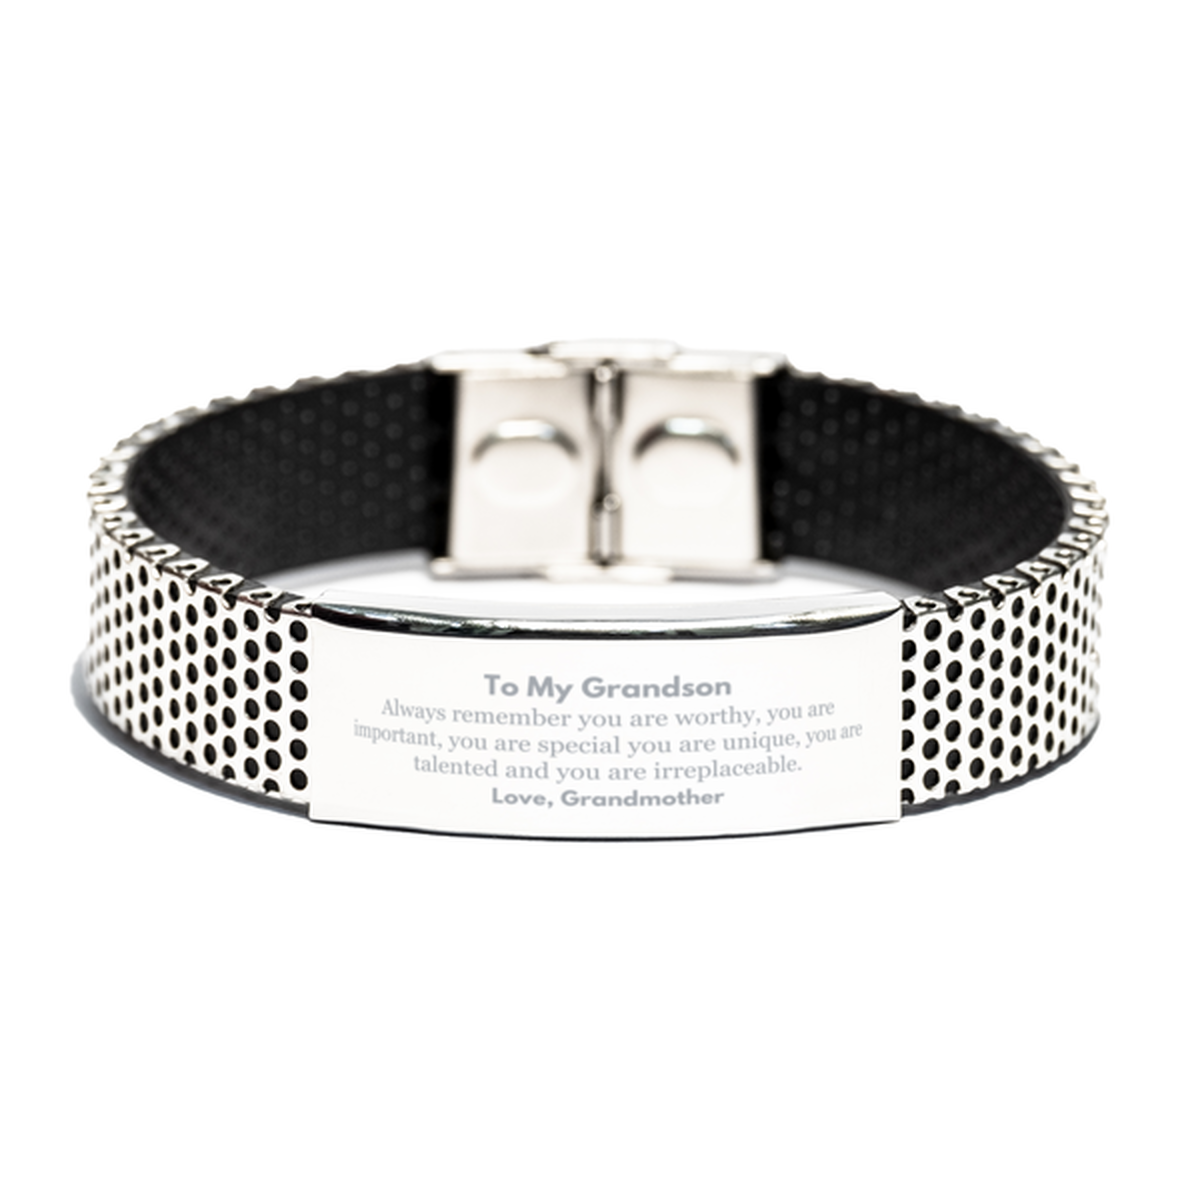 Grandson Birthday Gifts from Grandmother, Inspirational Stainless Steel Bracelet for Grandson Christmas Graduation Gifts for Grandson Always remember you are worthy, you are important. Love, Grandmother